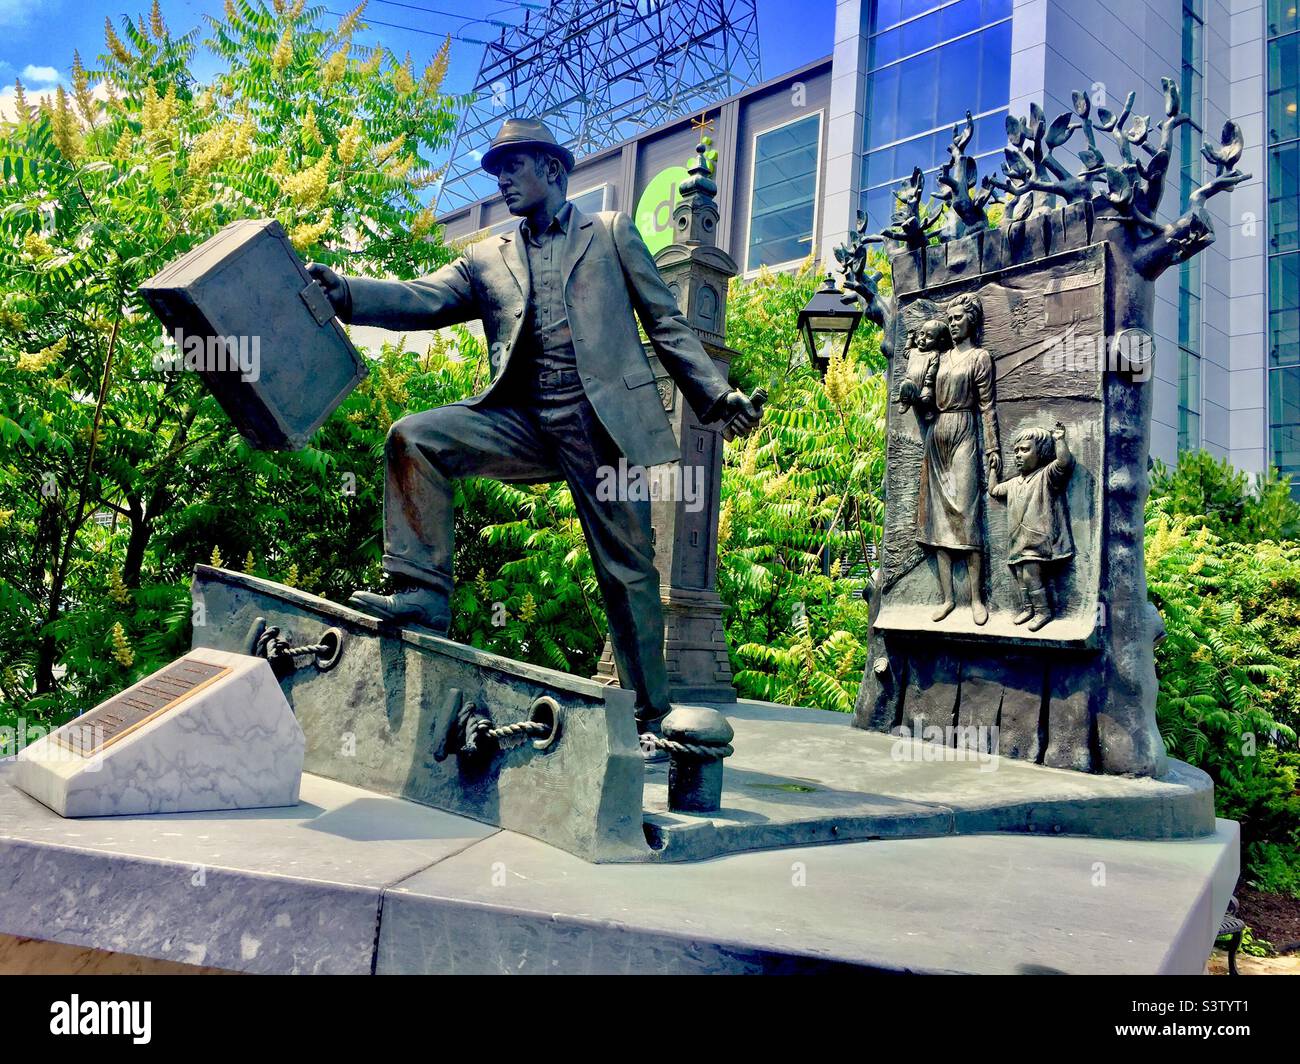 Immigration to America, commemorative sculpture at Pier 21, Halifax, Canada. Man with suitcase. Family in tow. Stock Photo